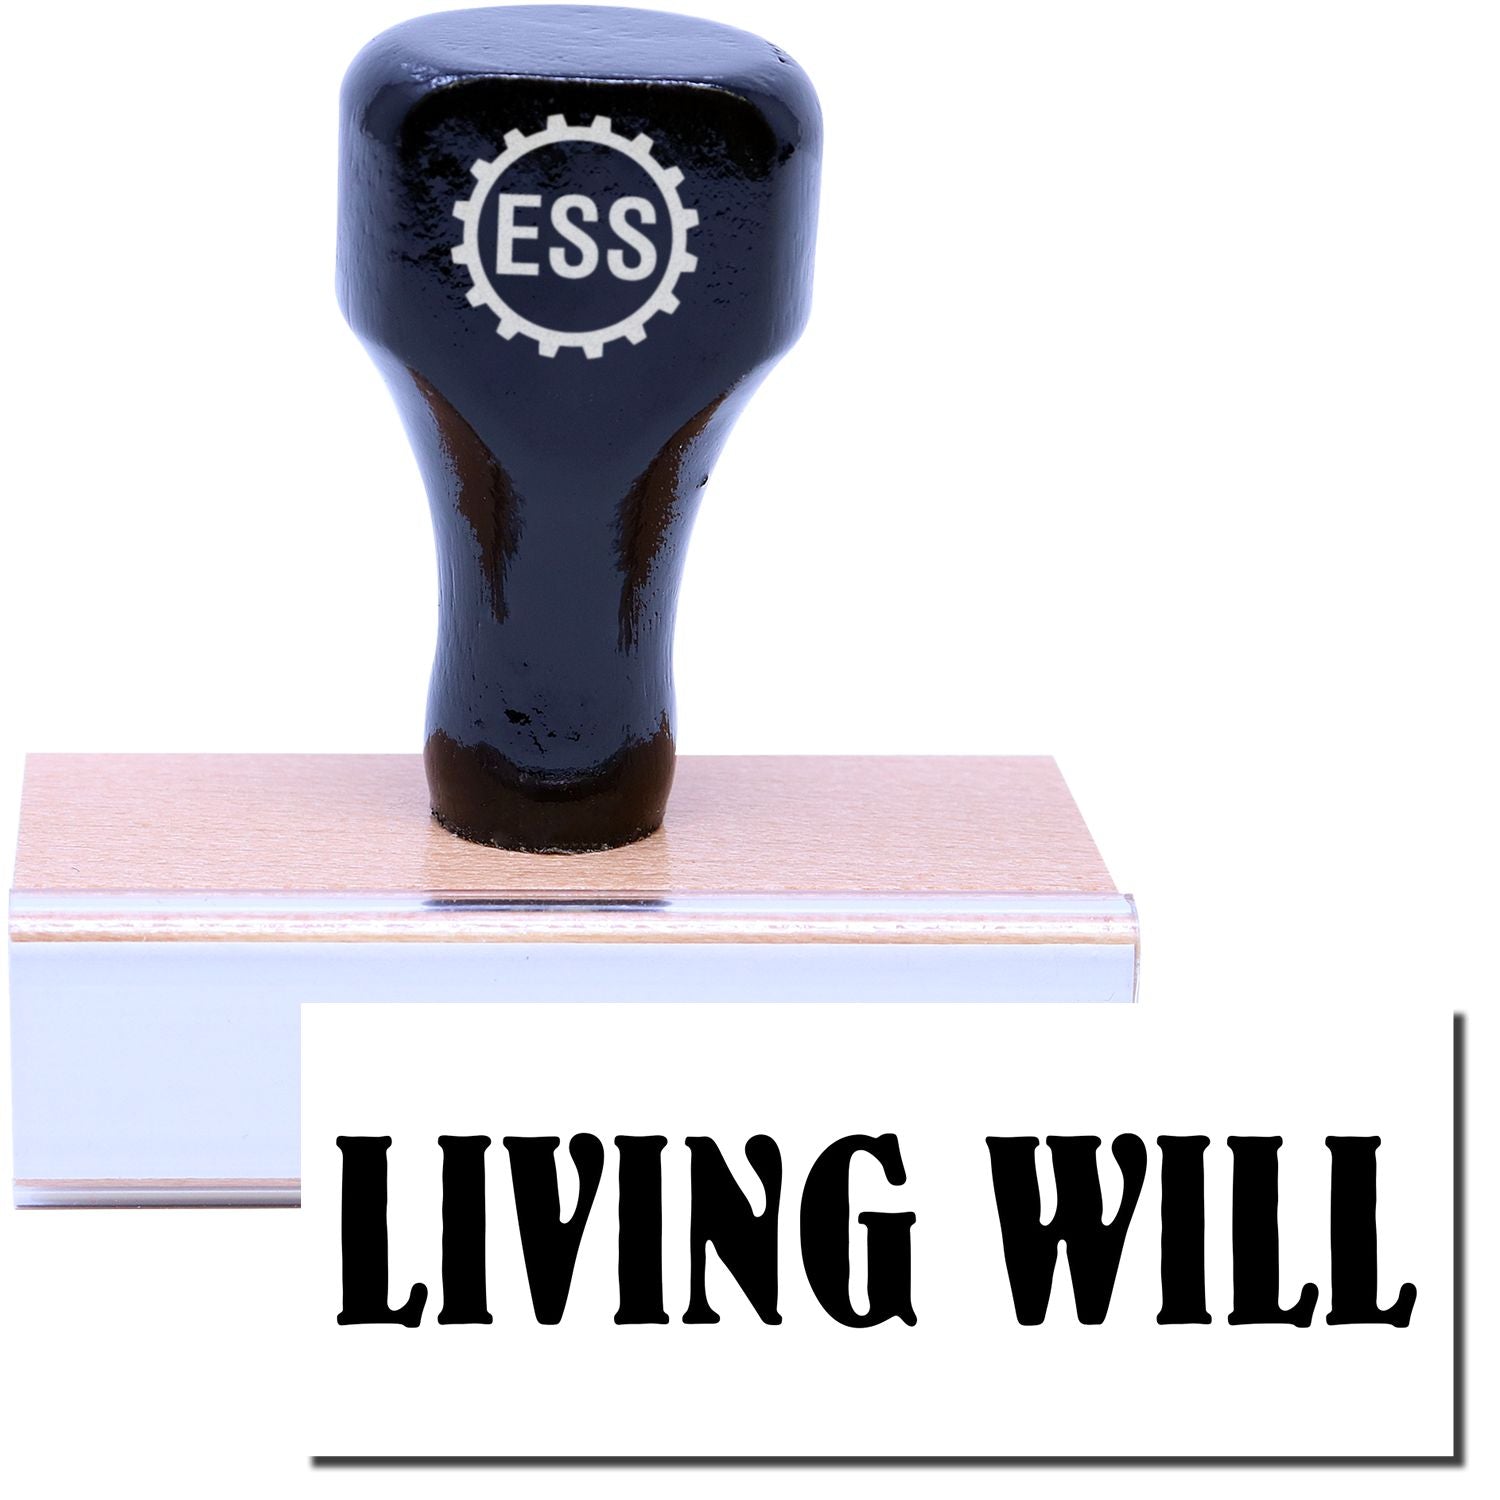 A stock office rubber stamp with a stamped image showing how the text "LIVING WILL" in a large font is displayed after stamping.